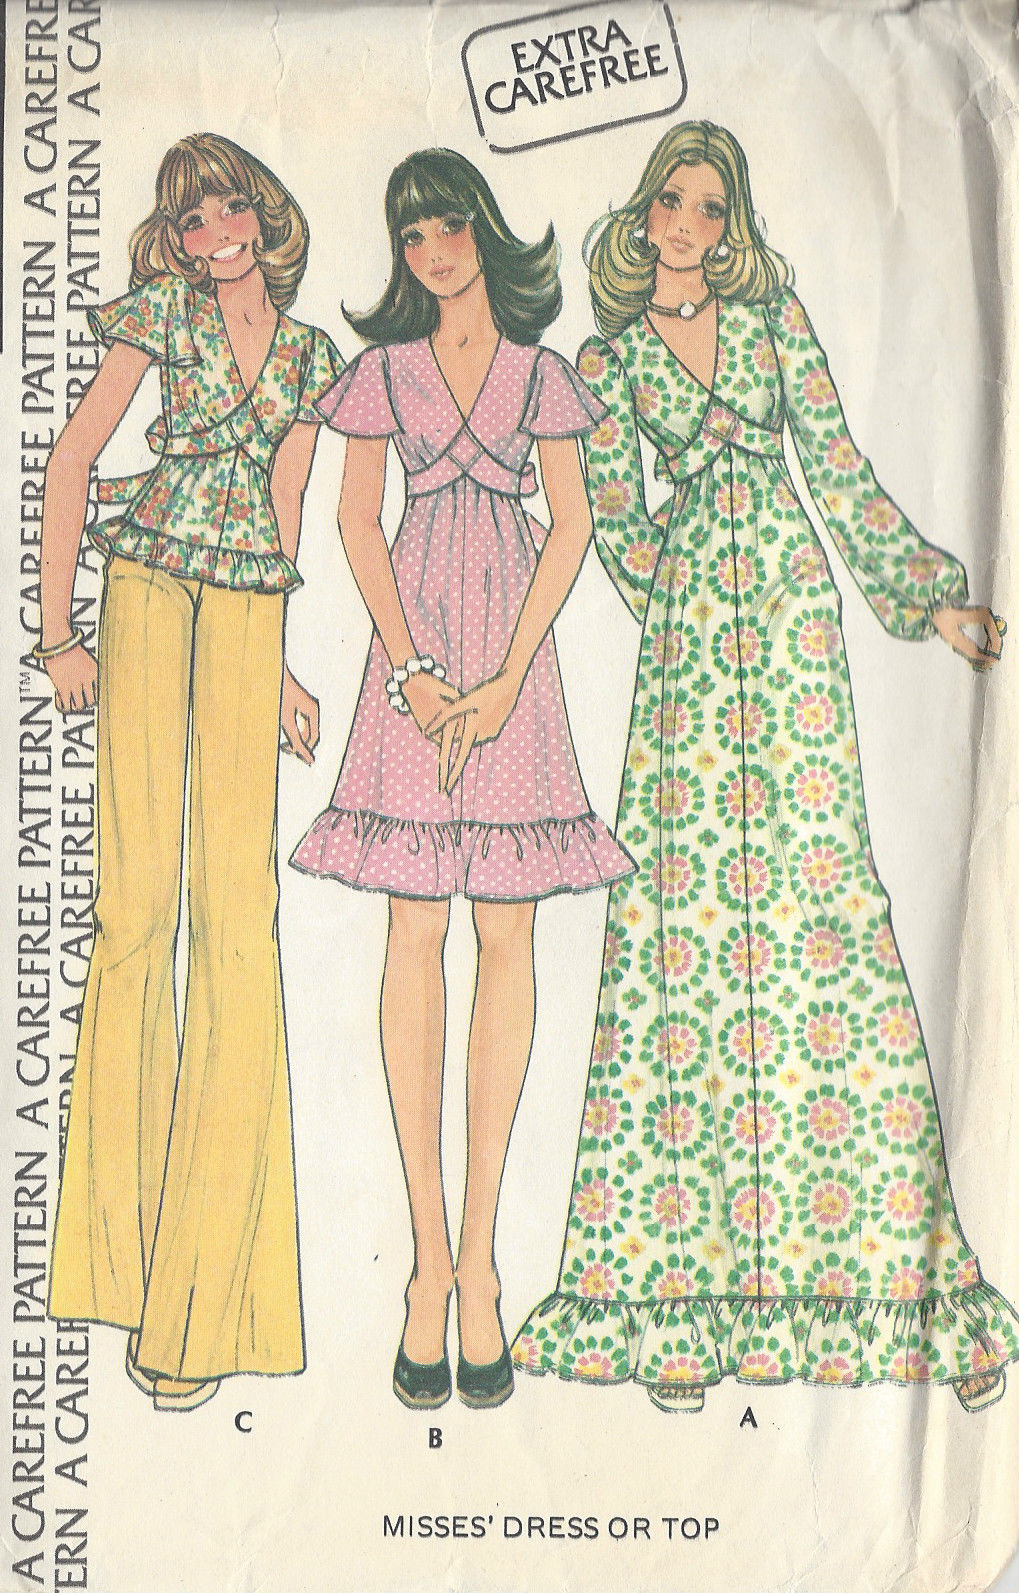 McCalls Paper Sewing Pattern 7325, 1013743